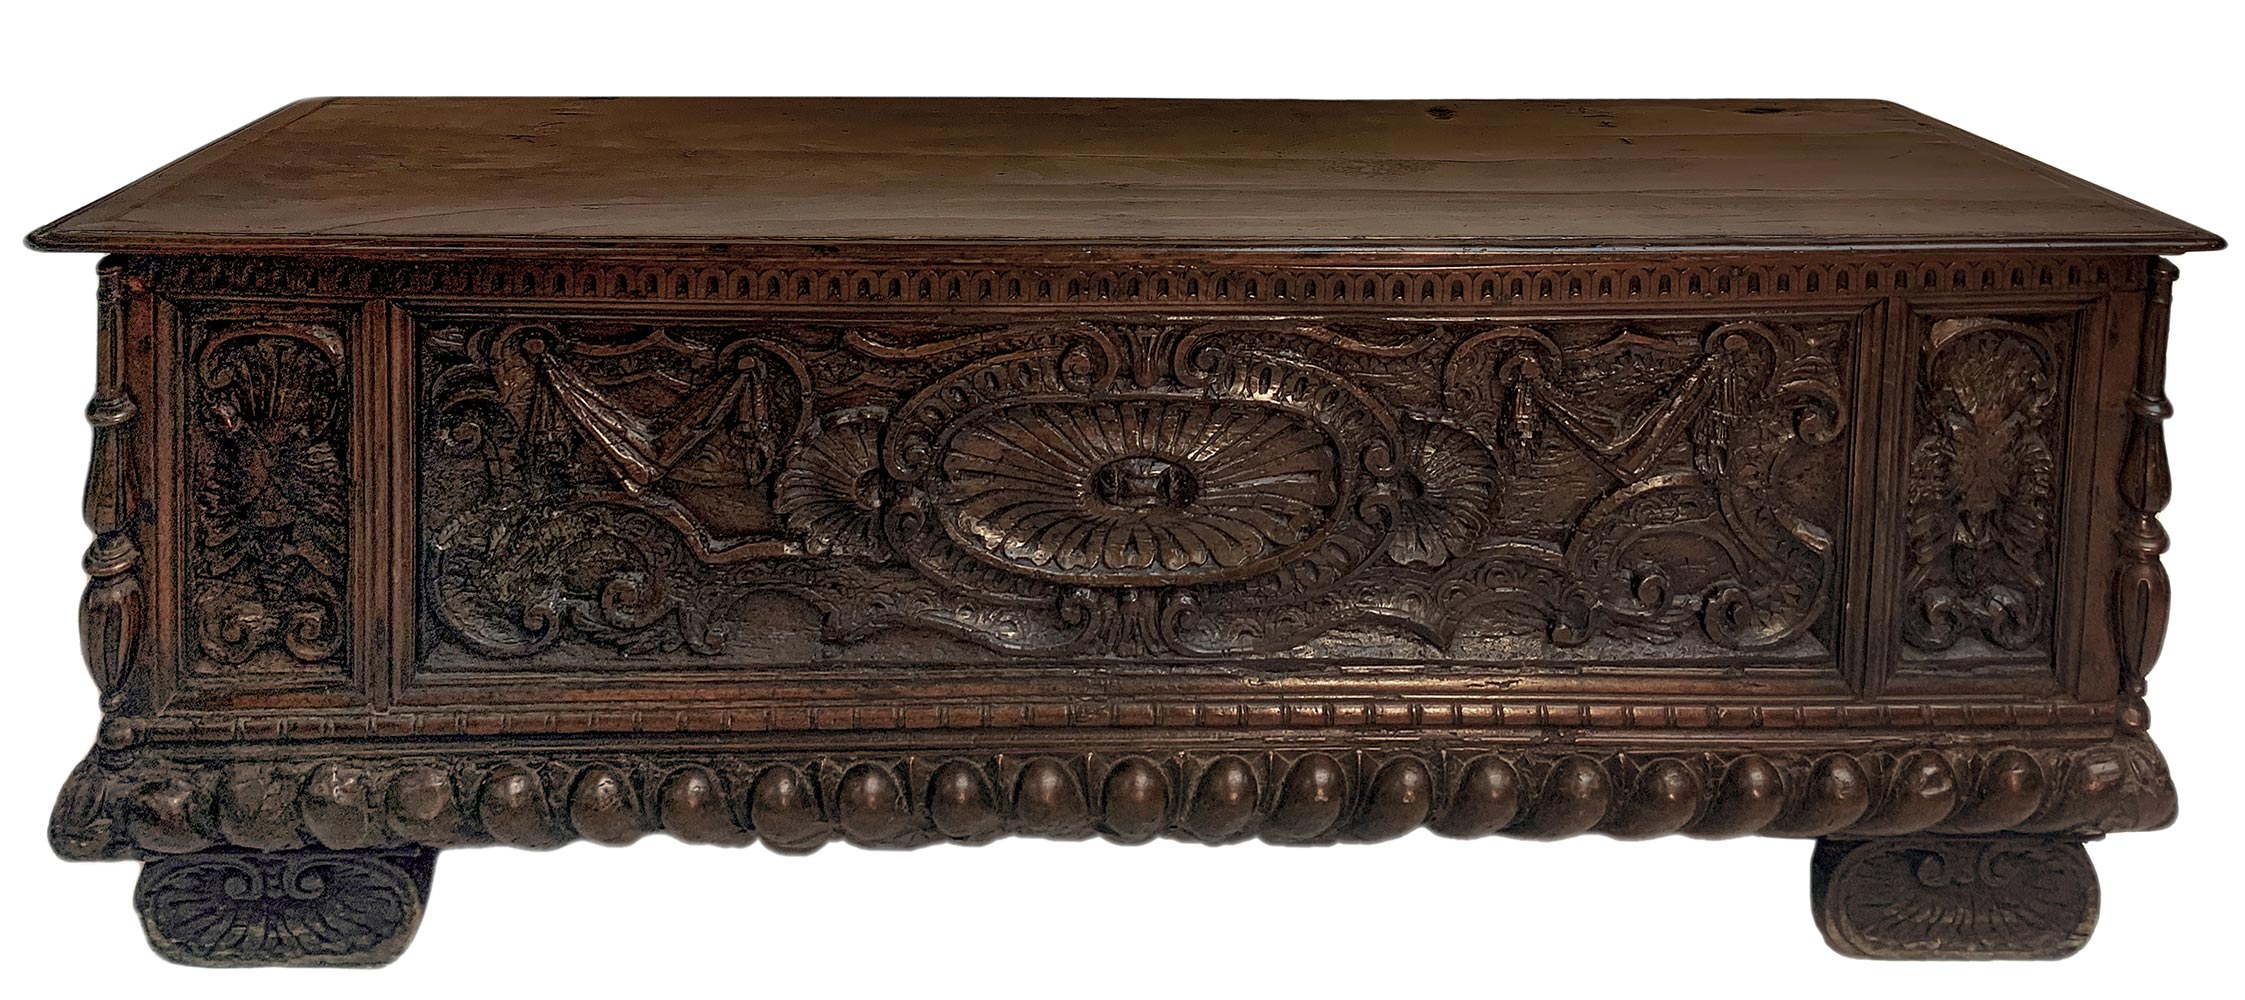 Chest in walnut, seventeenth century Tuscany. Carved on the front with baroque styles, the basic